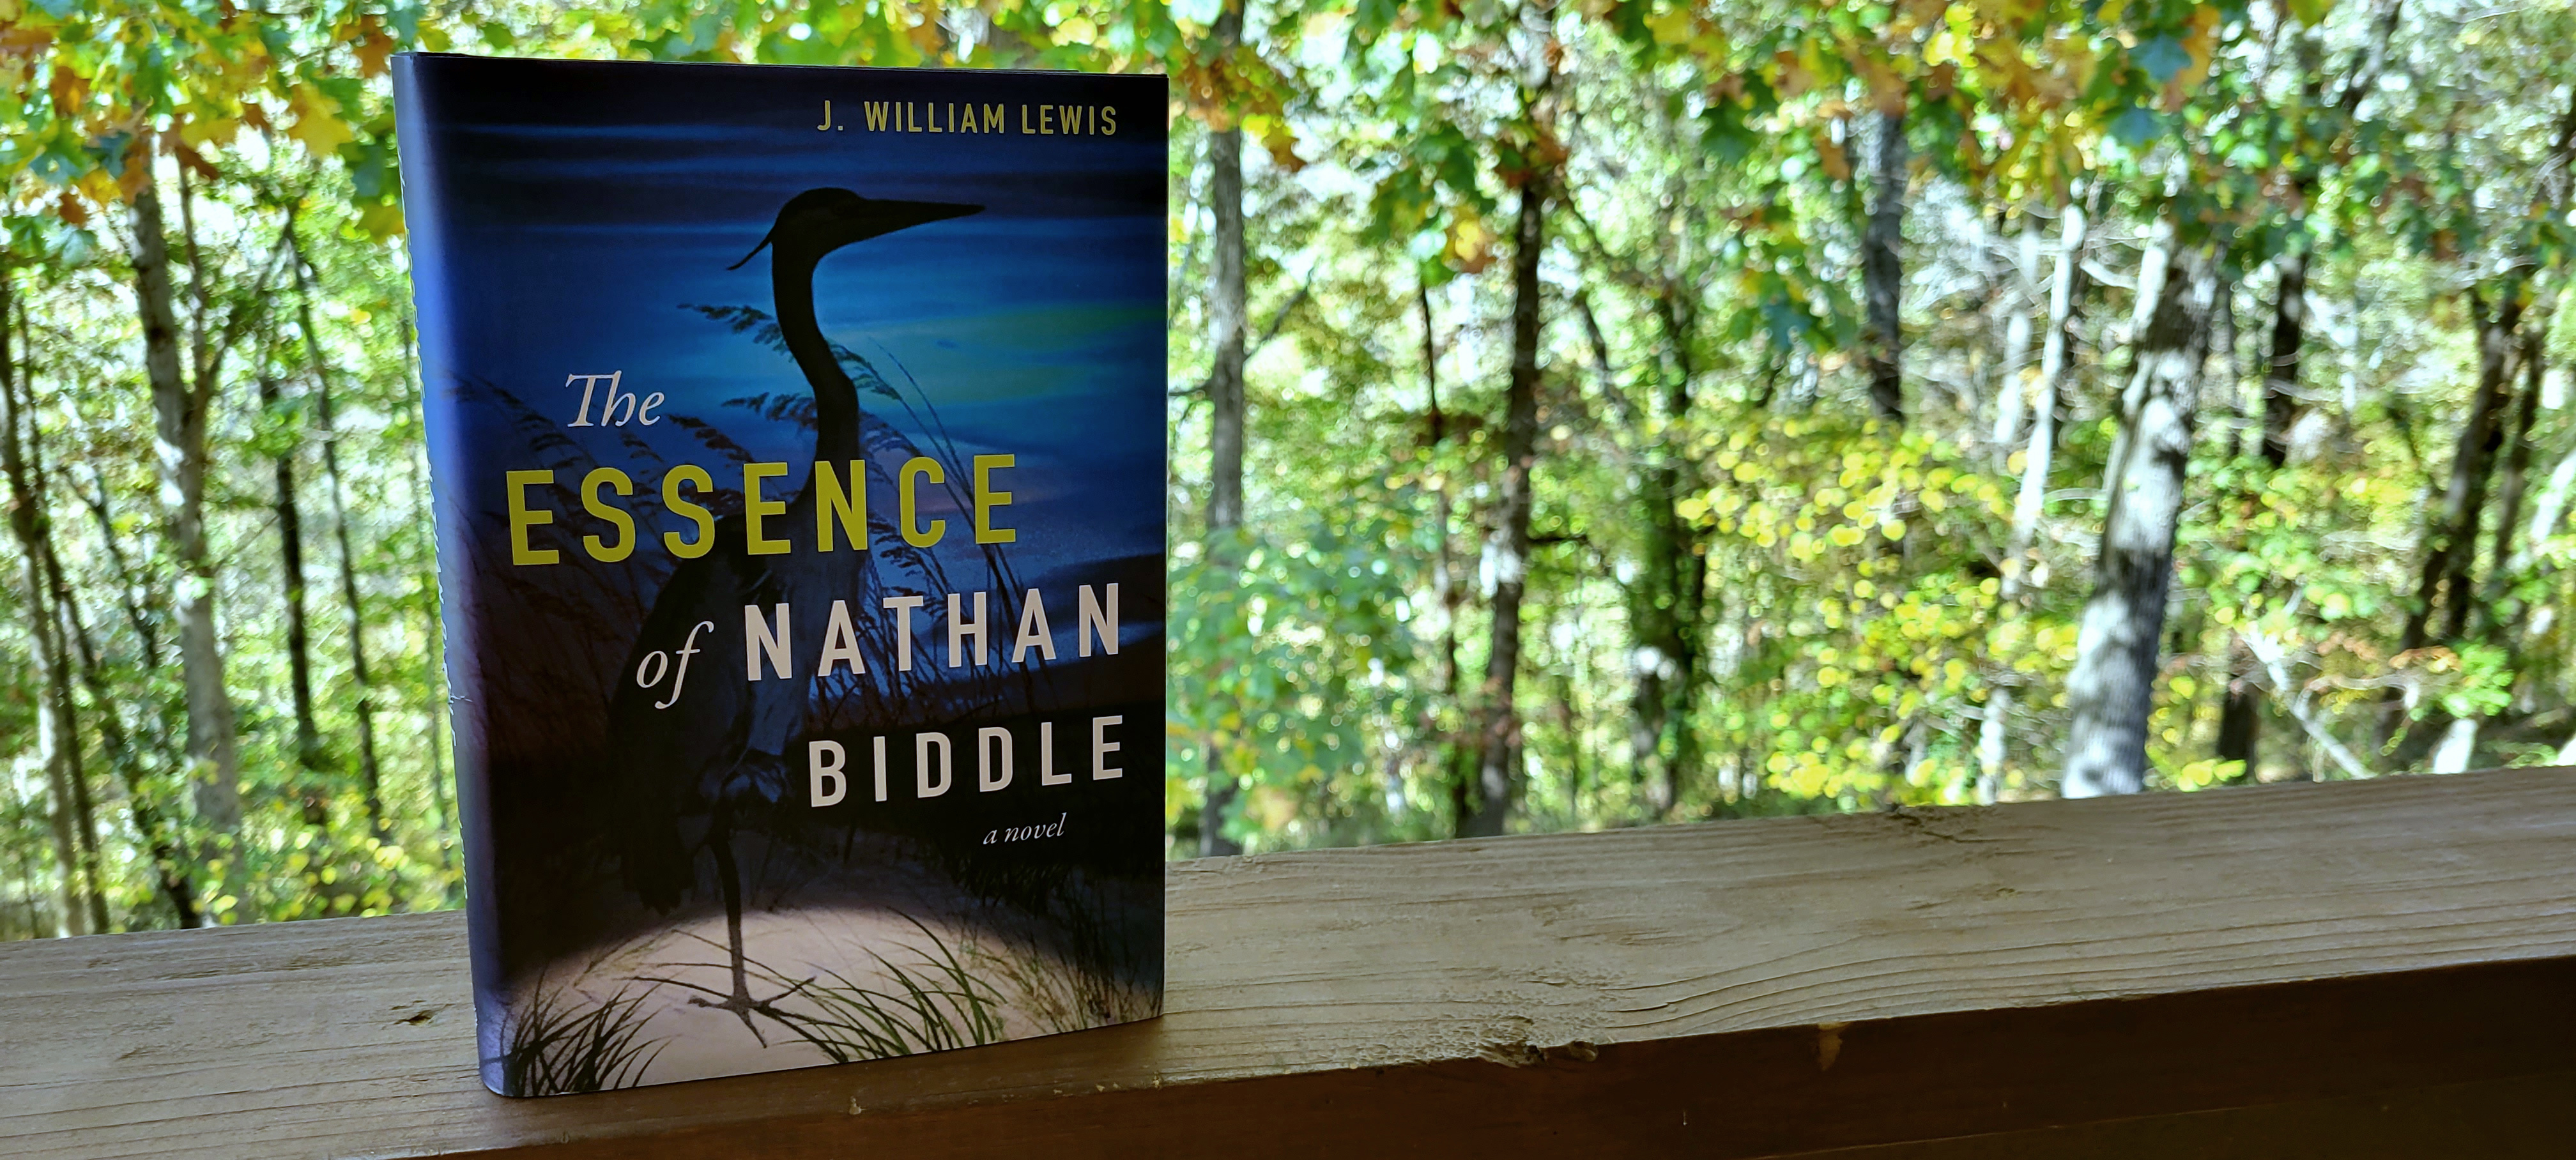 The Essence of Nathan Biddle by J. William Lewis